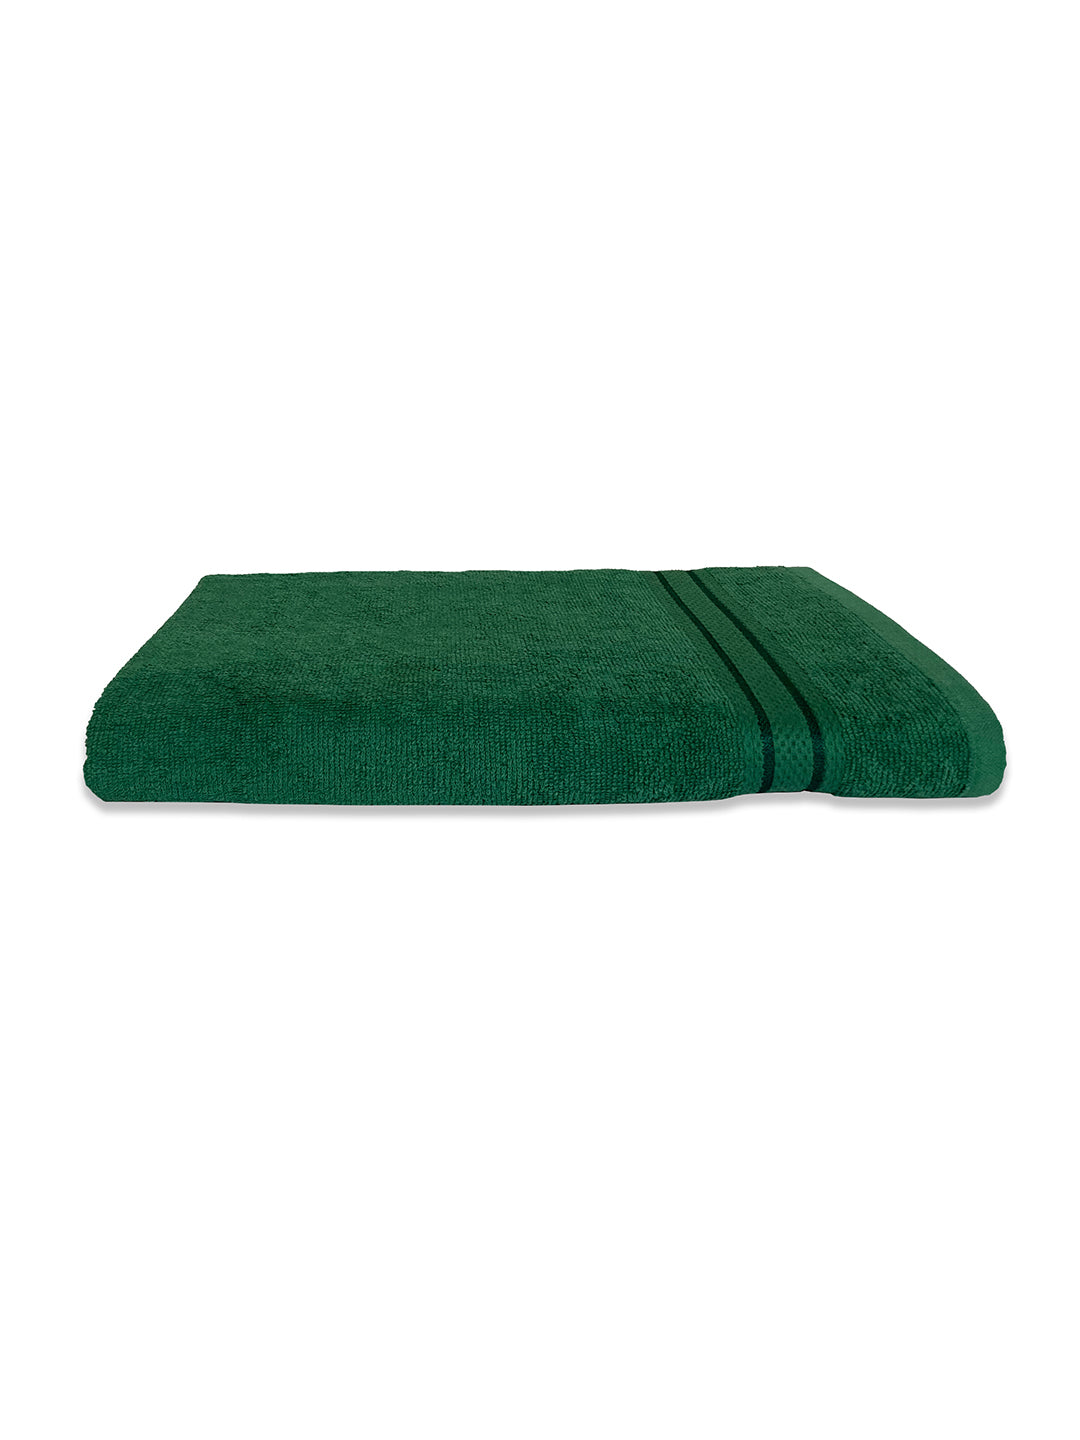 Spaces Day2Day 400 GSM Solid Large Bath Towel (Green)